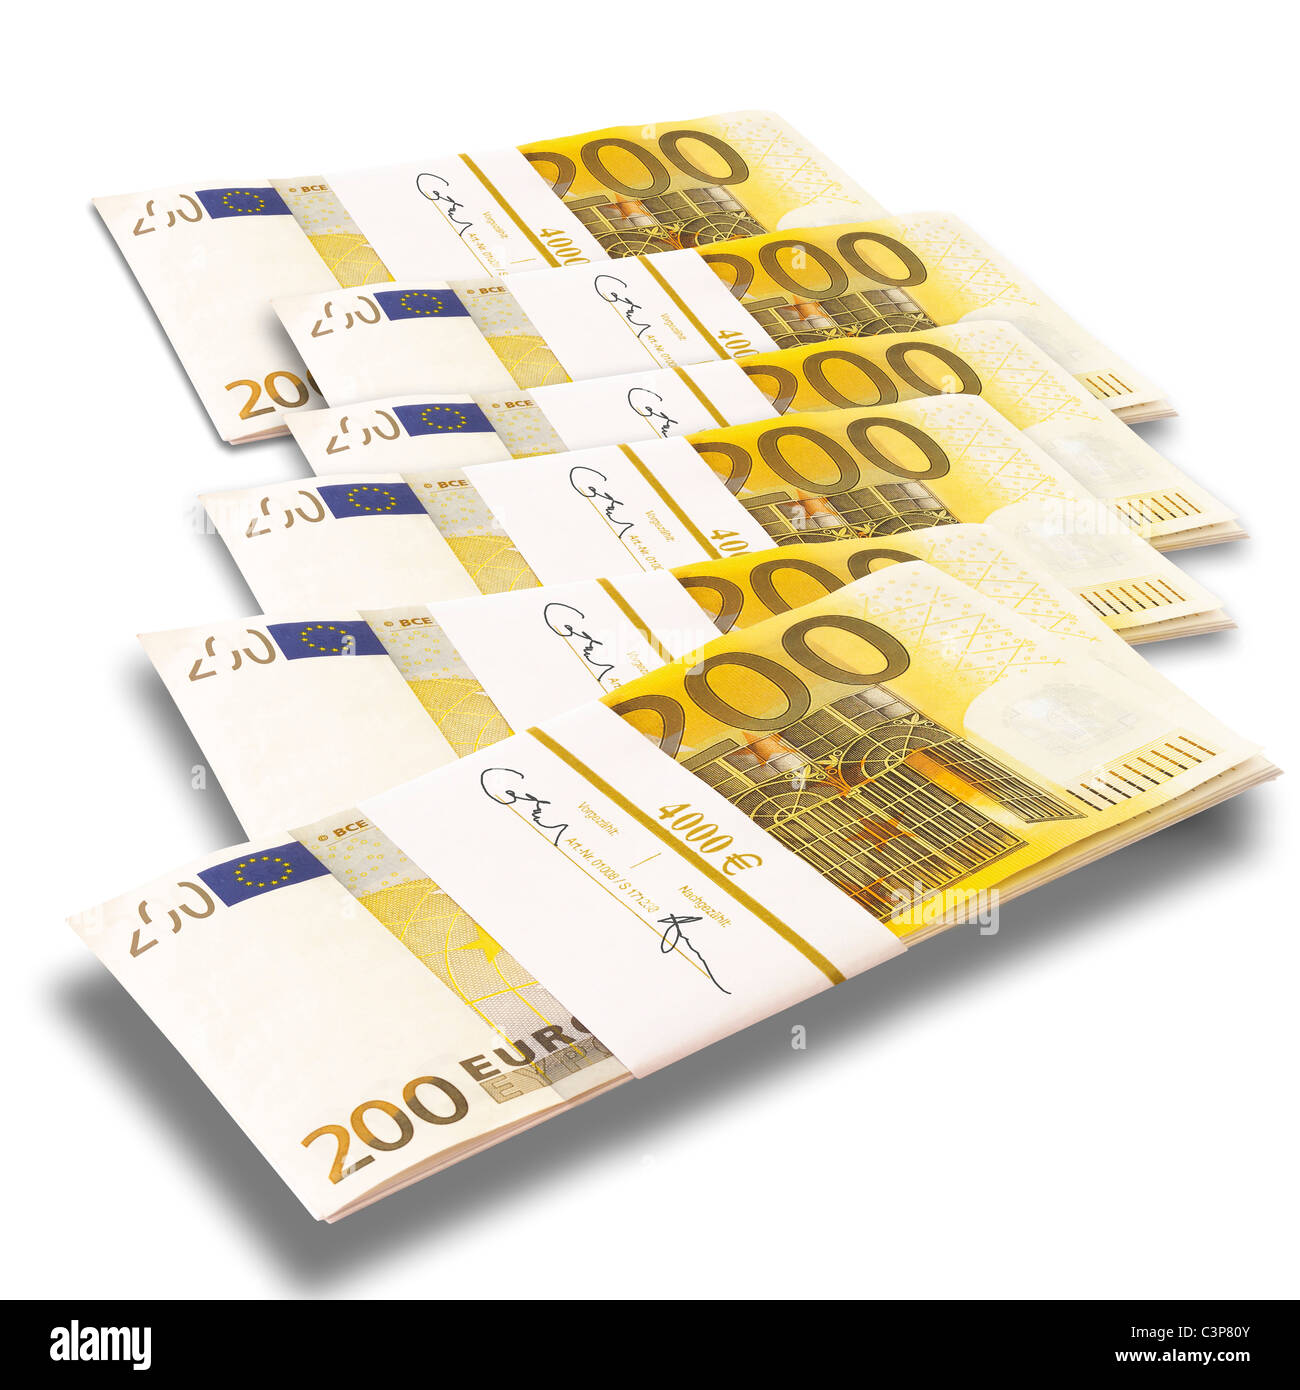 Bunches of 200 Euro notes on white background Stock Photo